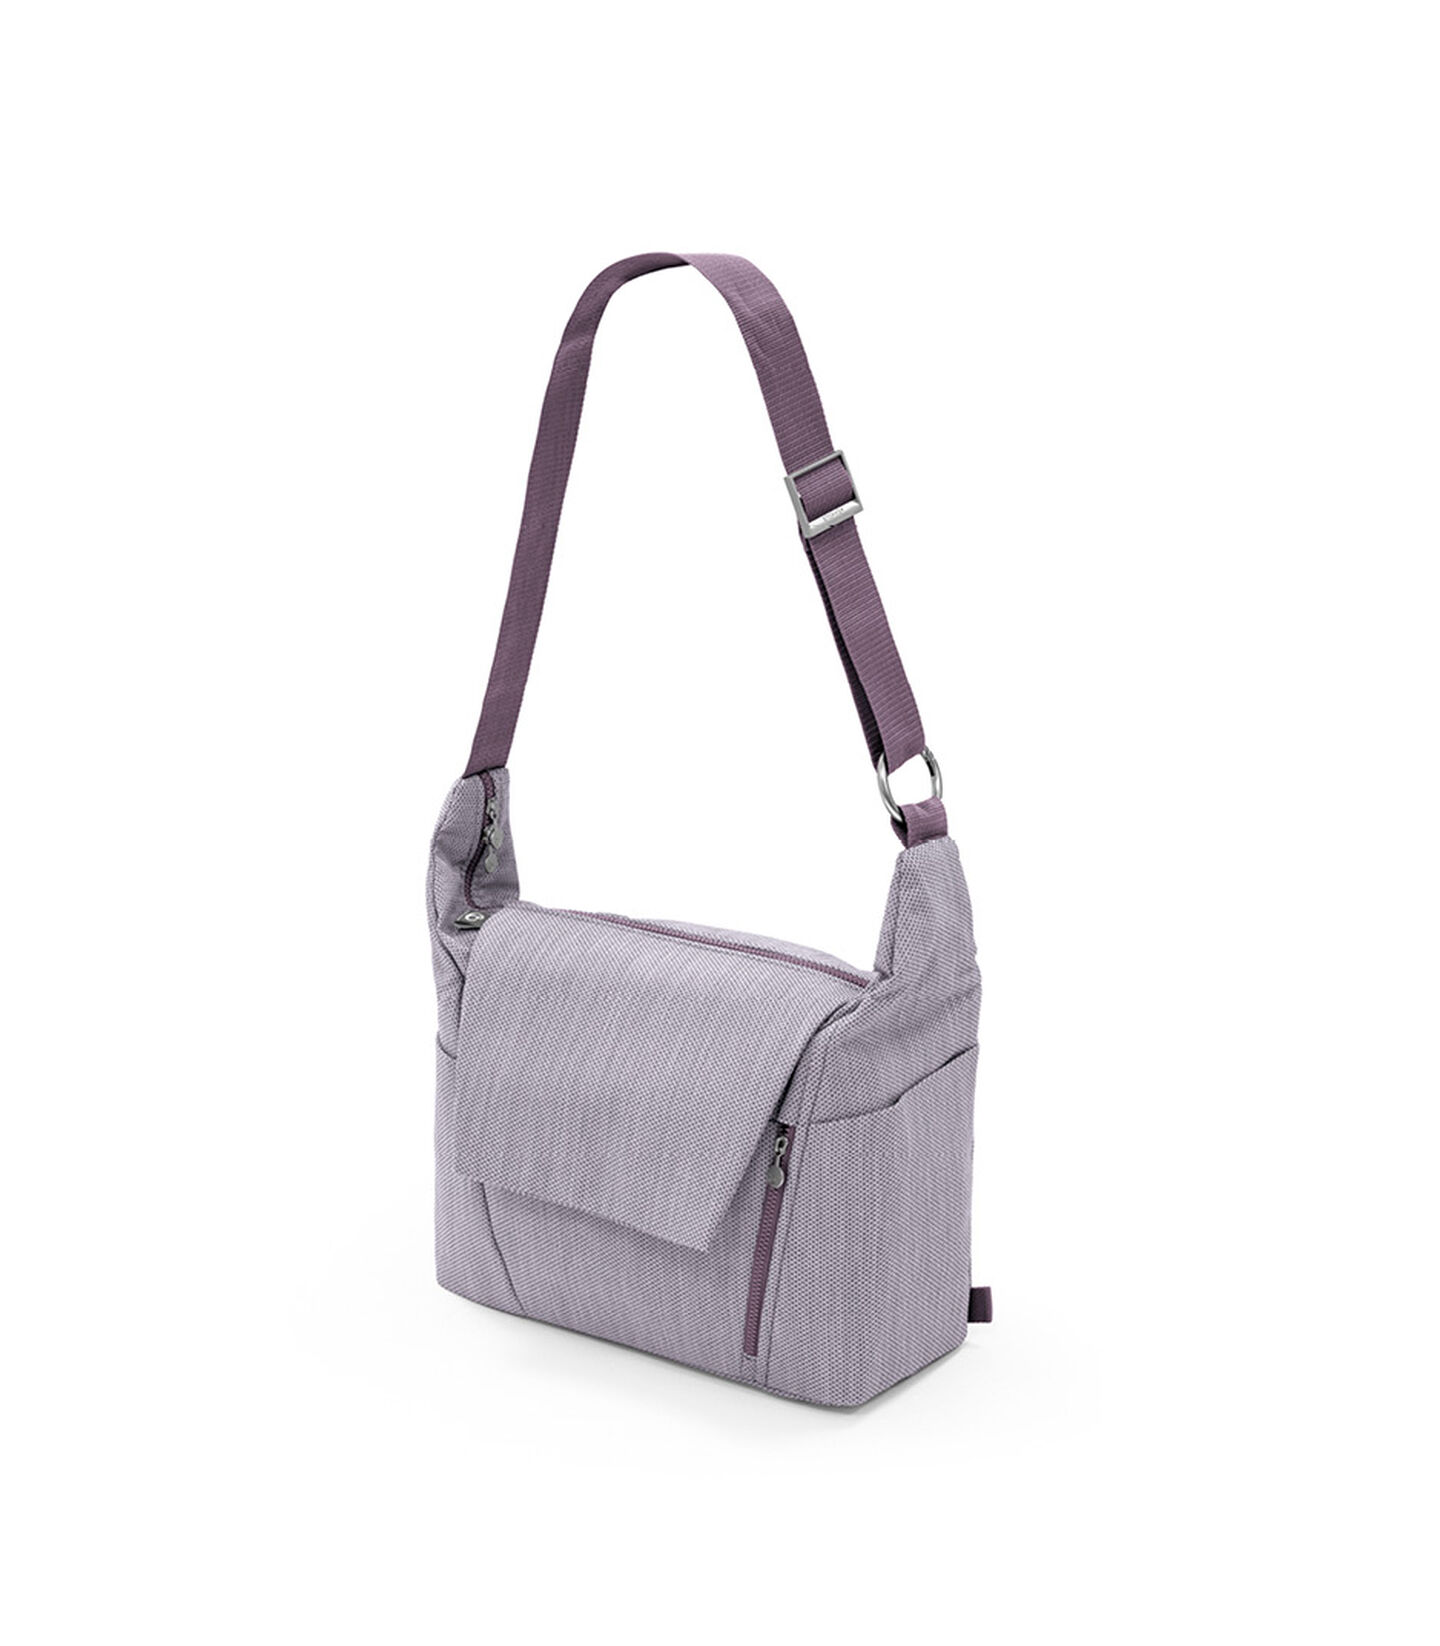 Stokke® Changing bag Brushed Lilac, ブラッシュライラック, mainview view 2